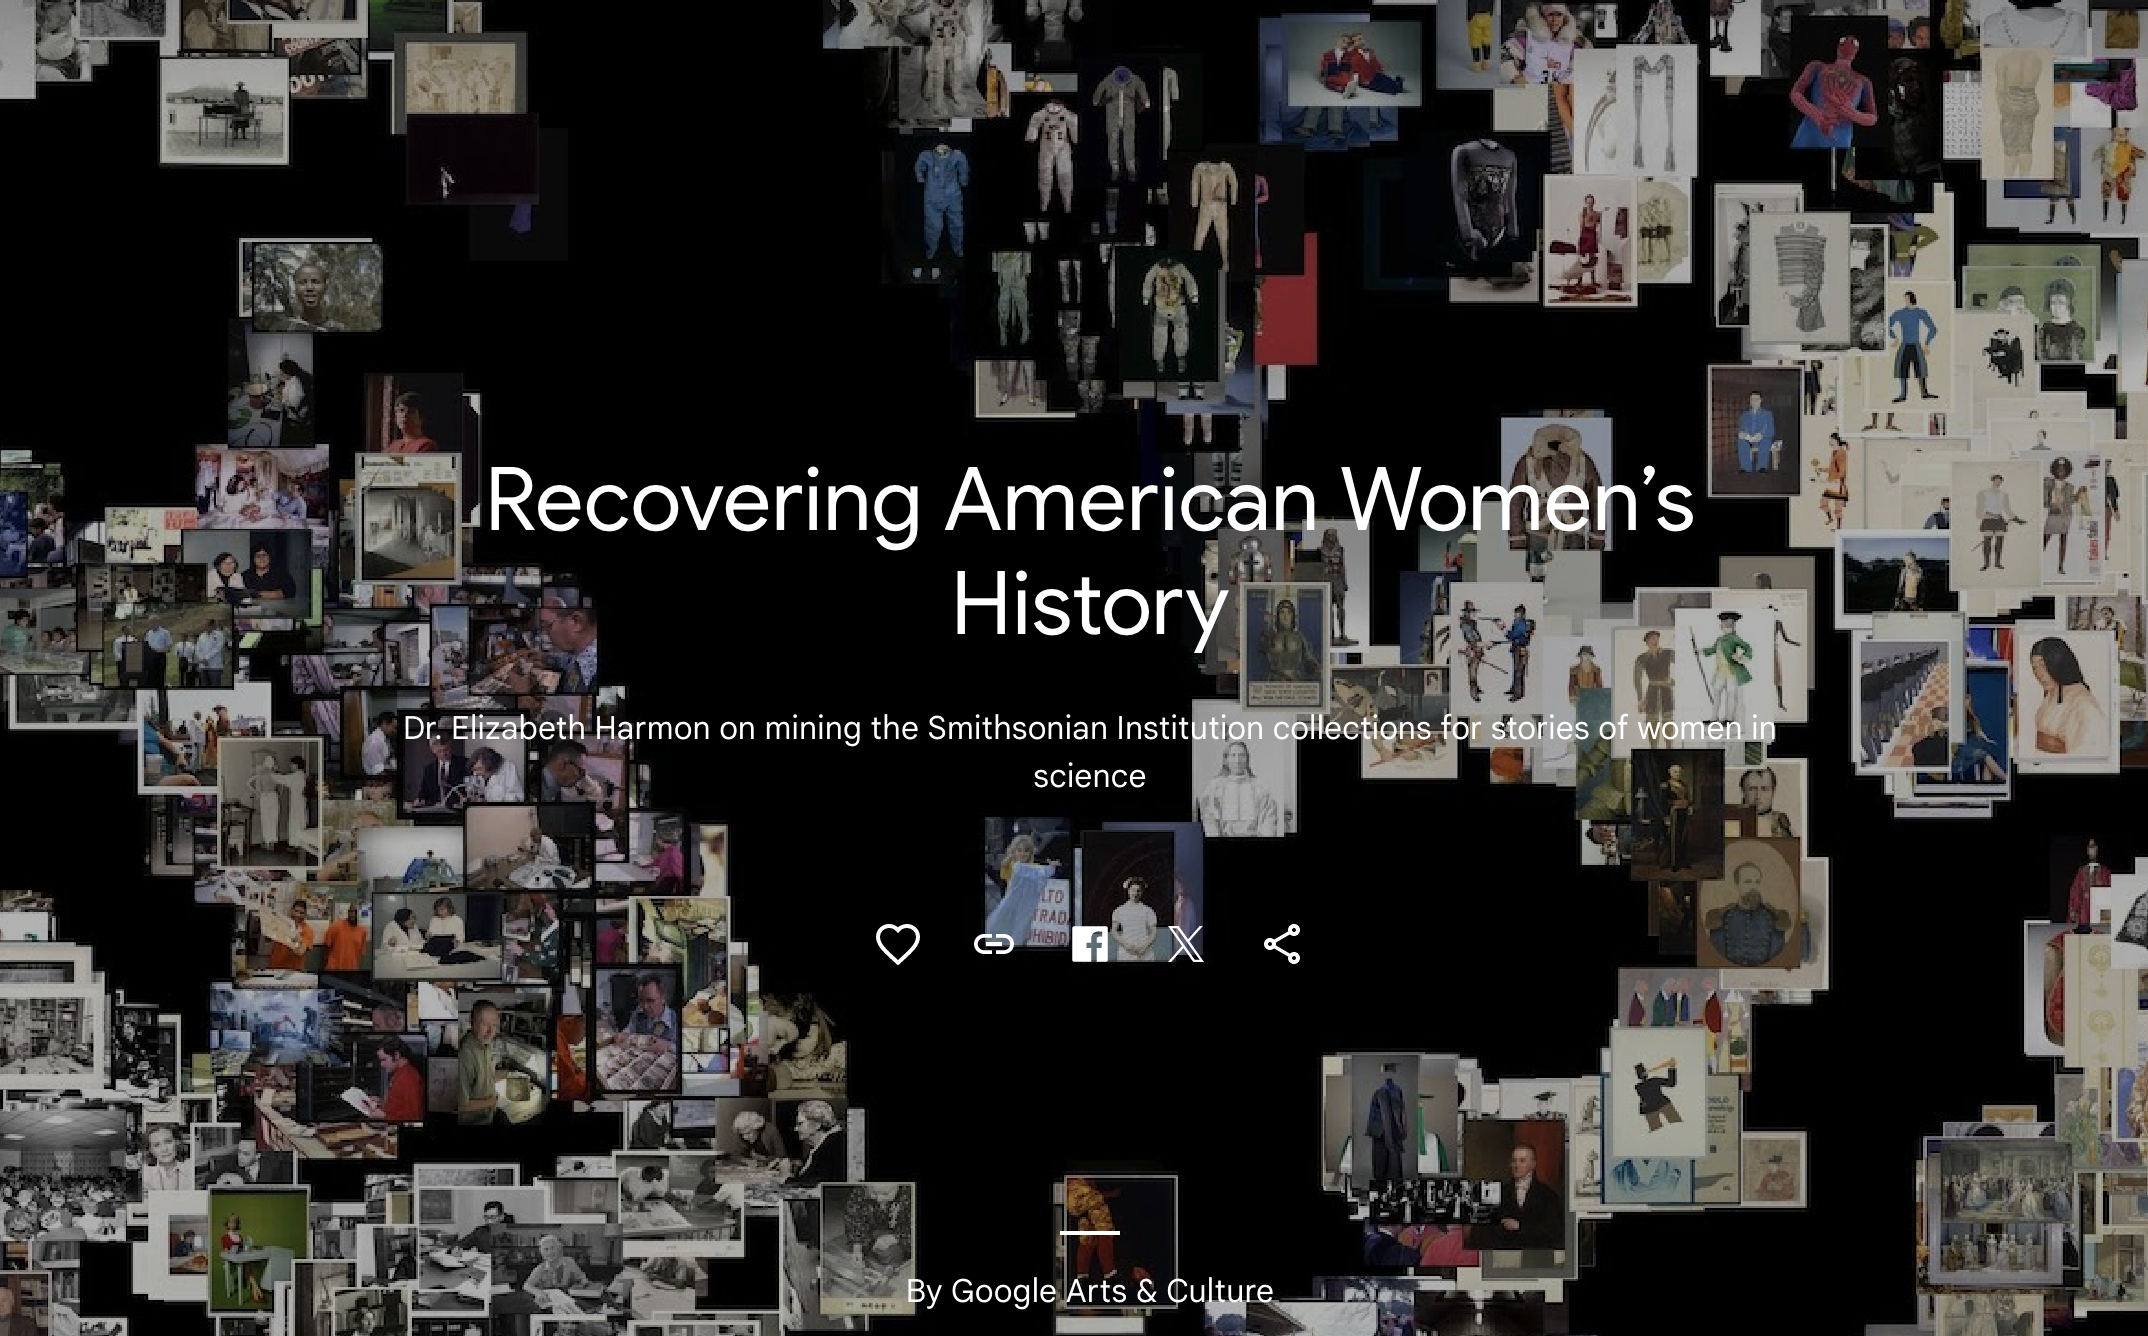 screenshot of a gallery of photos with the title "Recovering American Women's History"